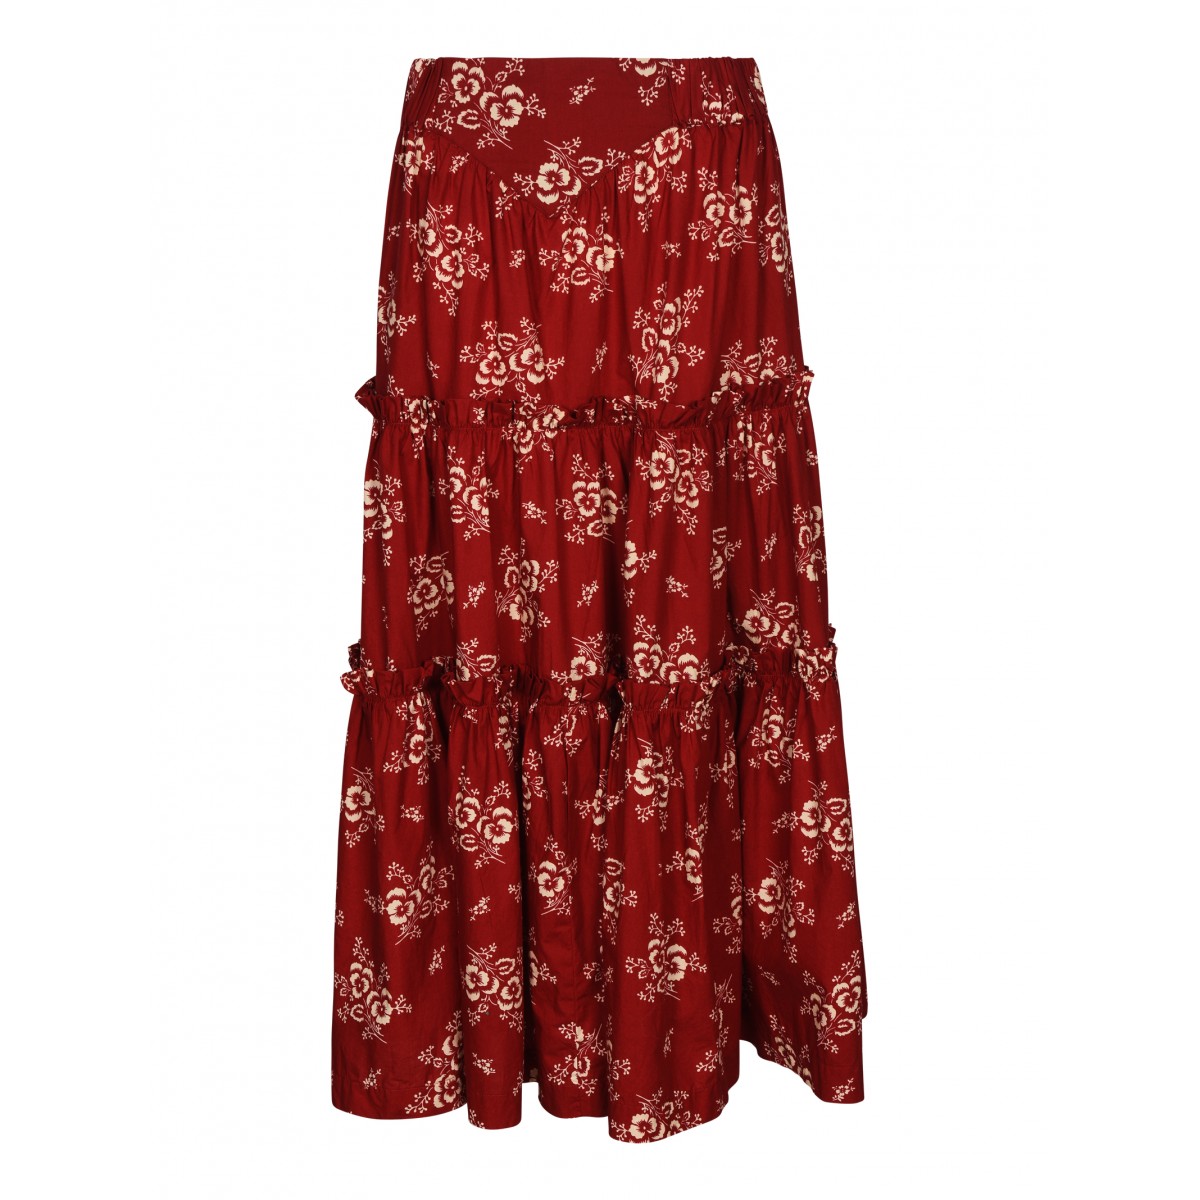 Red Alessia floral print skirt